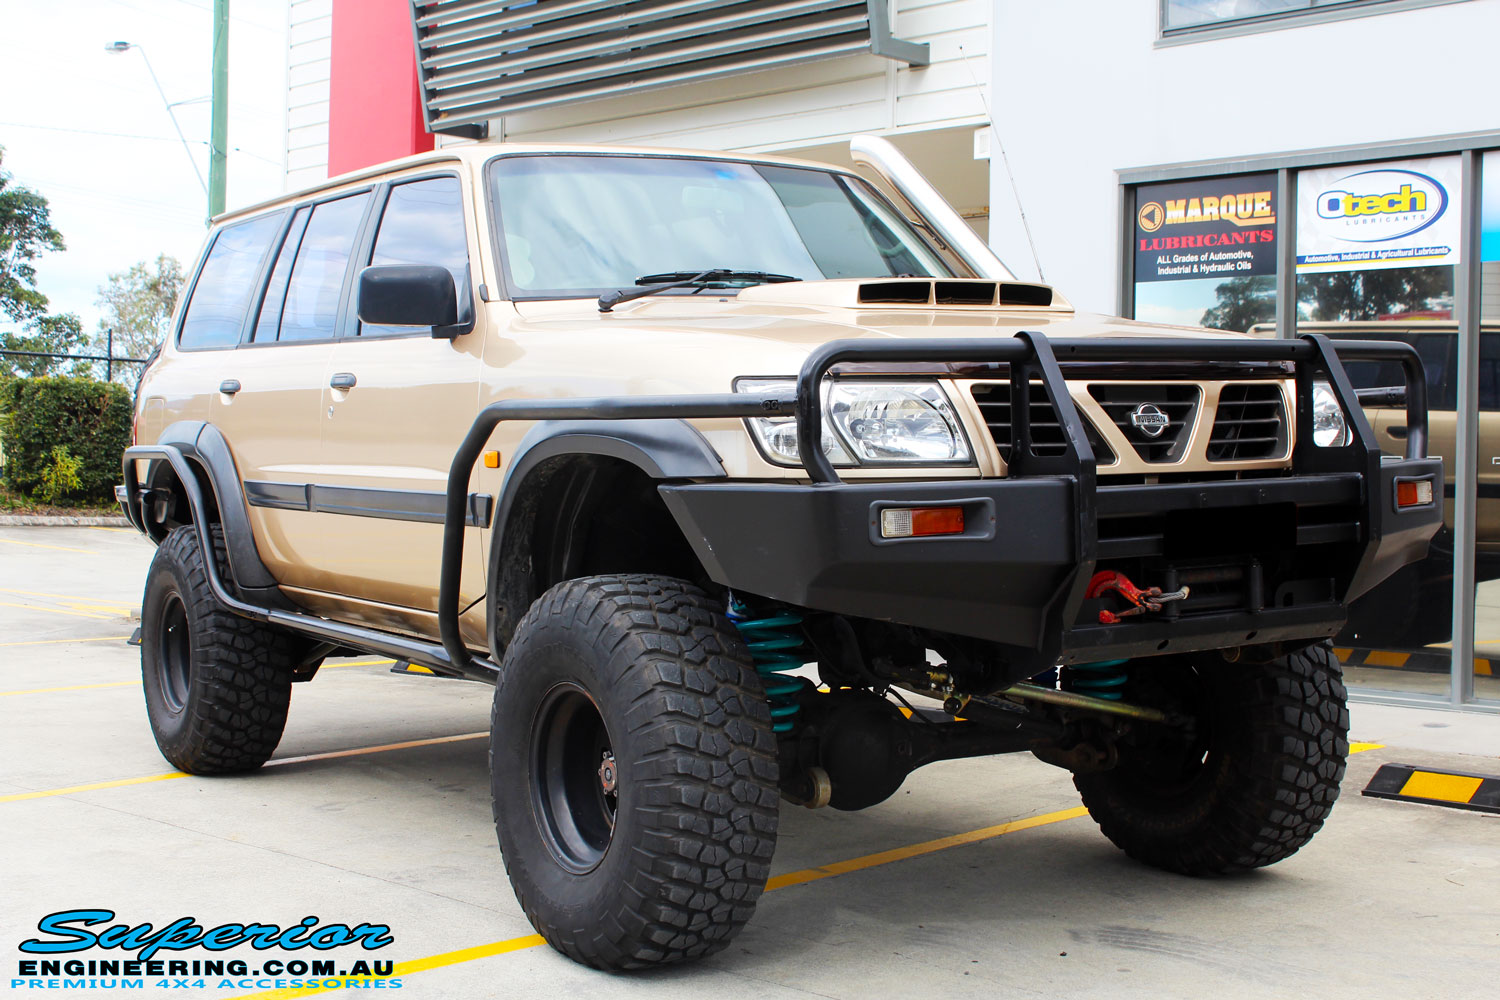 Right front side view of a Gold Nissan GU Patrol Wagon being fitted with Superior Lower Control Arms, Adjustable Upper Control Arms, Comp Spec 4340m Drag Link, 4" Inch Front & Rear Dobinson Coil Springs, Superior Coil Tower Brace and Superior 5" Inch Remote Reservoir Front & Rear Shocks